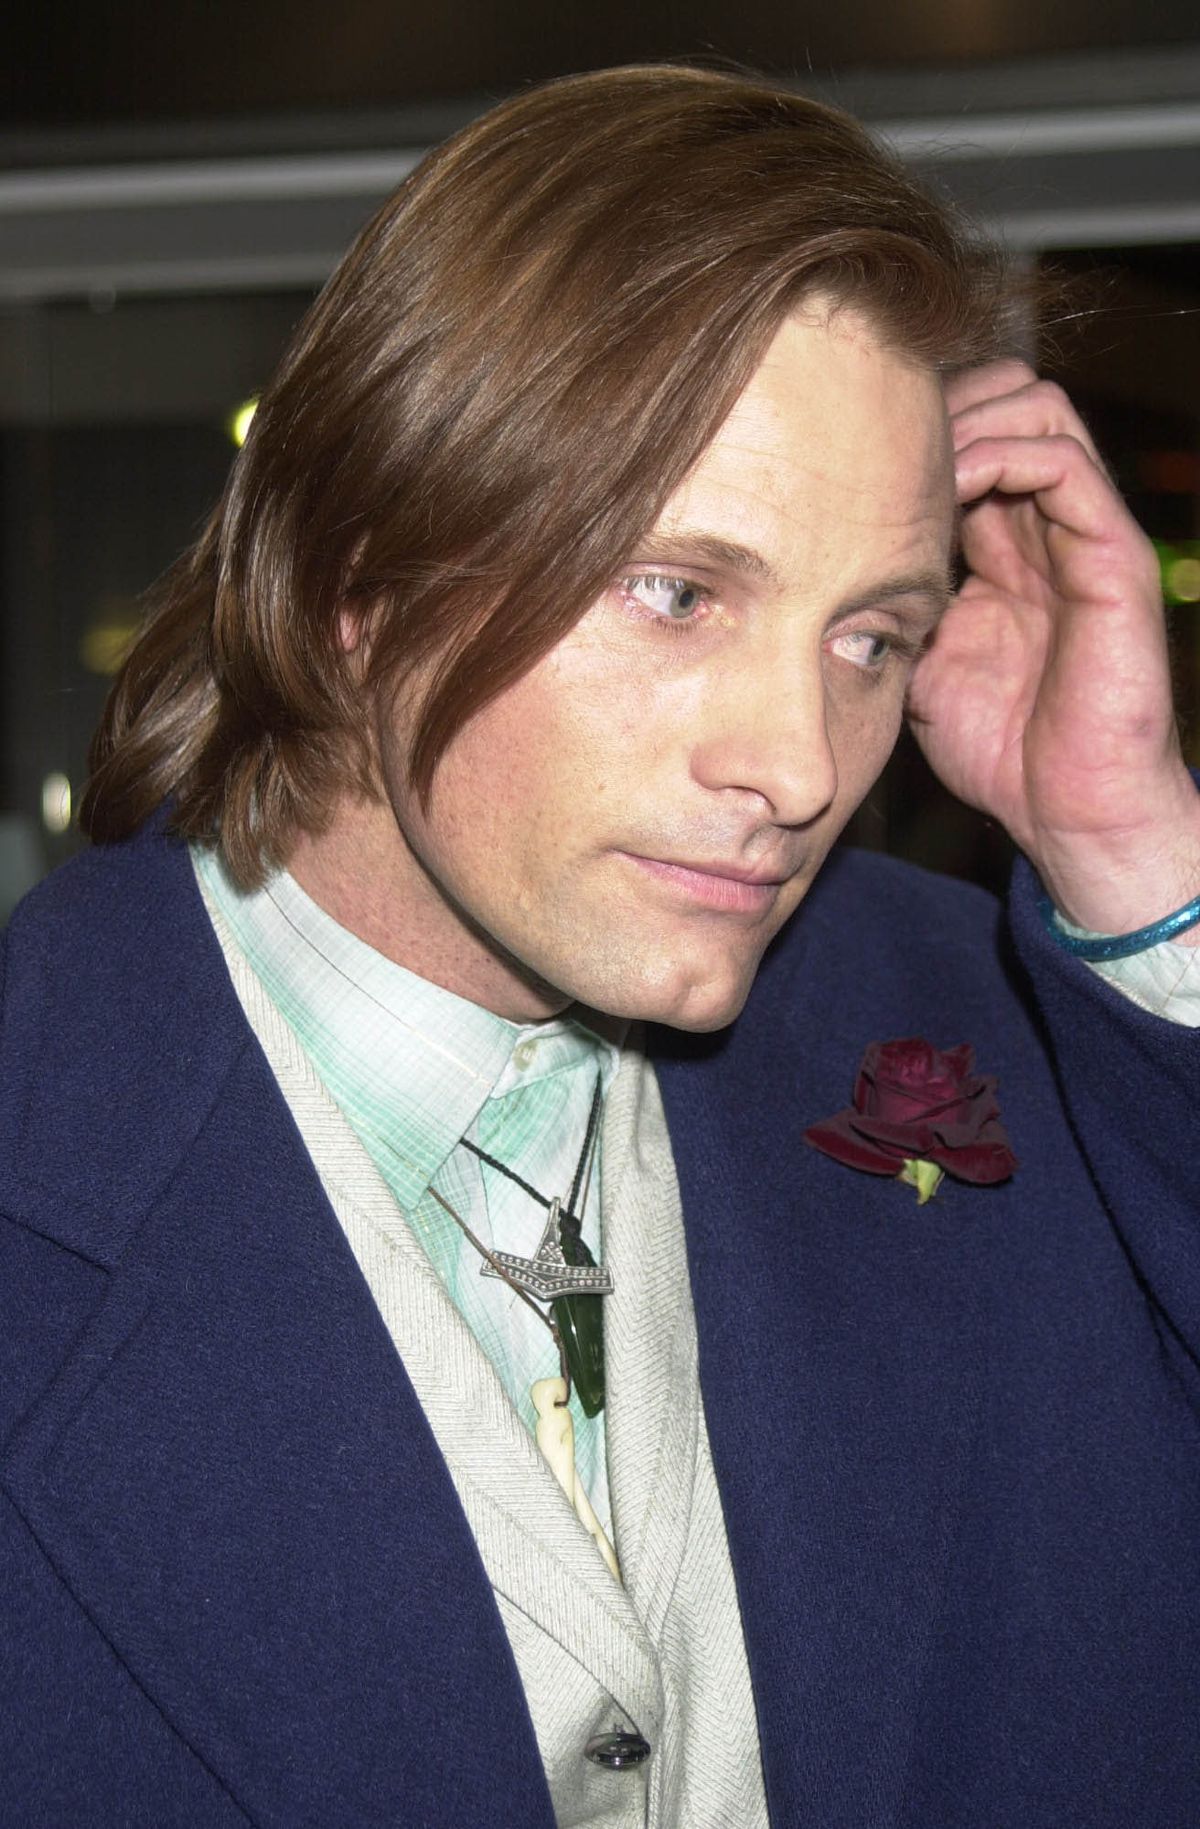 Viggo Mortensen pushes his hair back at the Lord Of The Rings World Movie Premiere